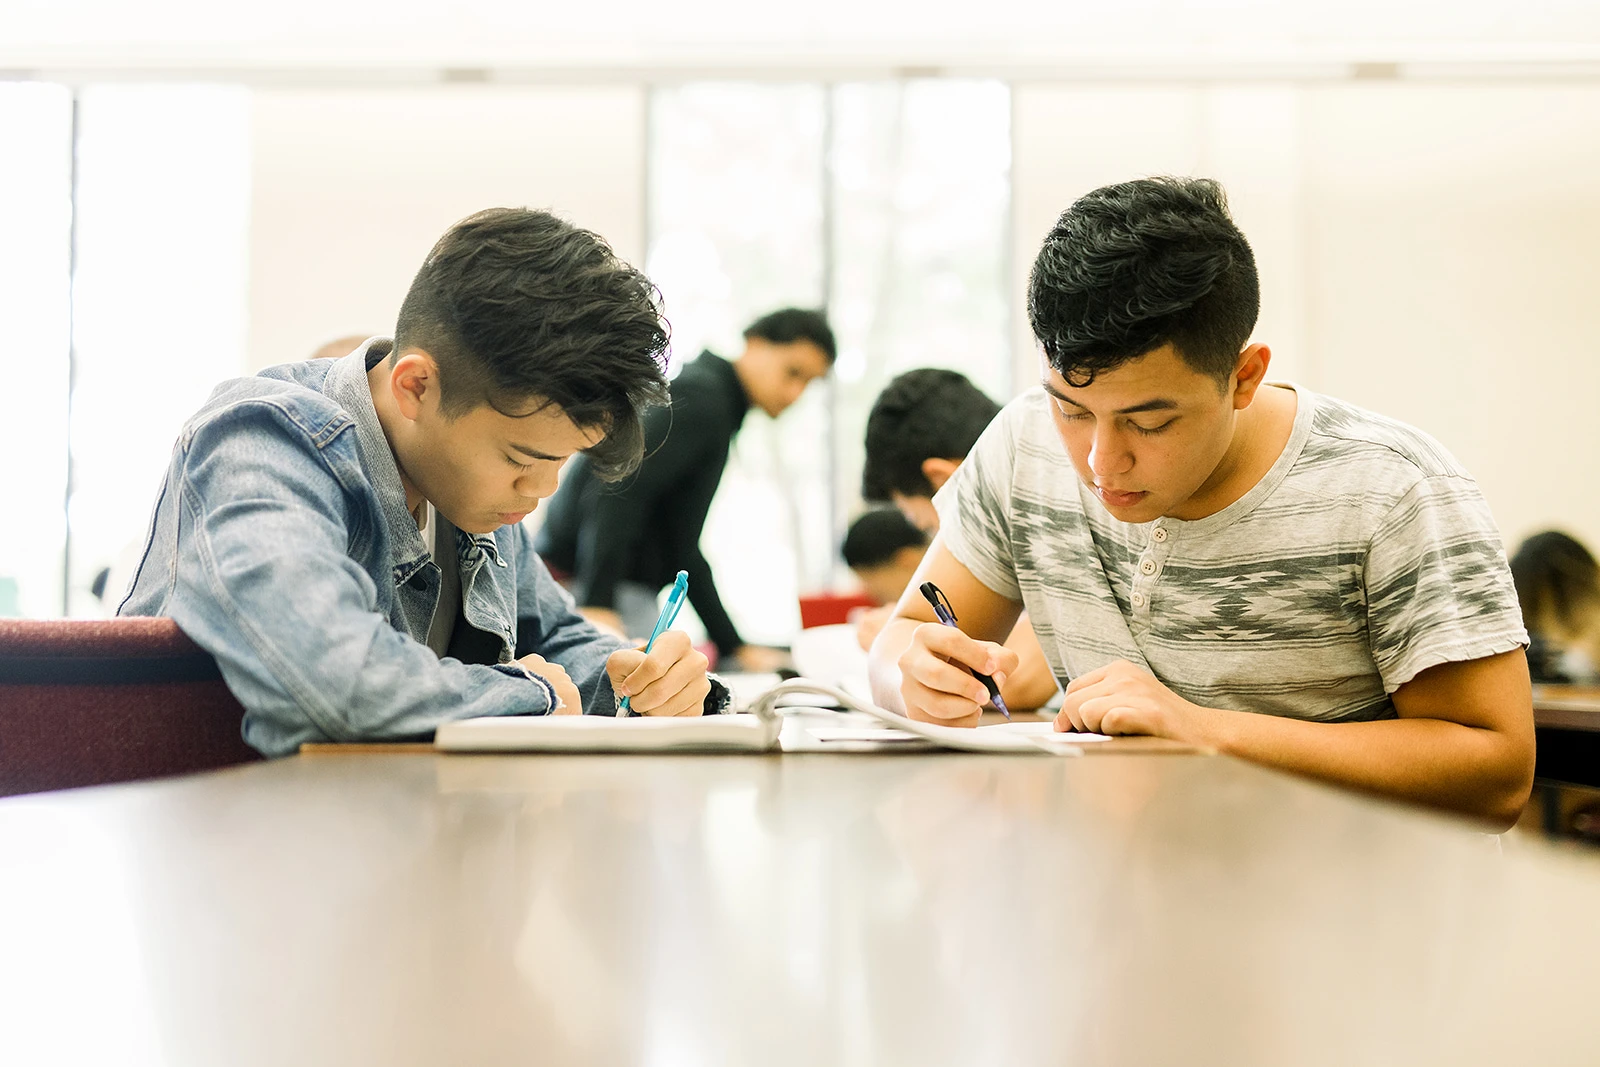 Two male students sit at a rectangle table taking notes from the same textbook